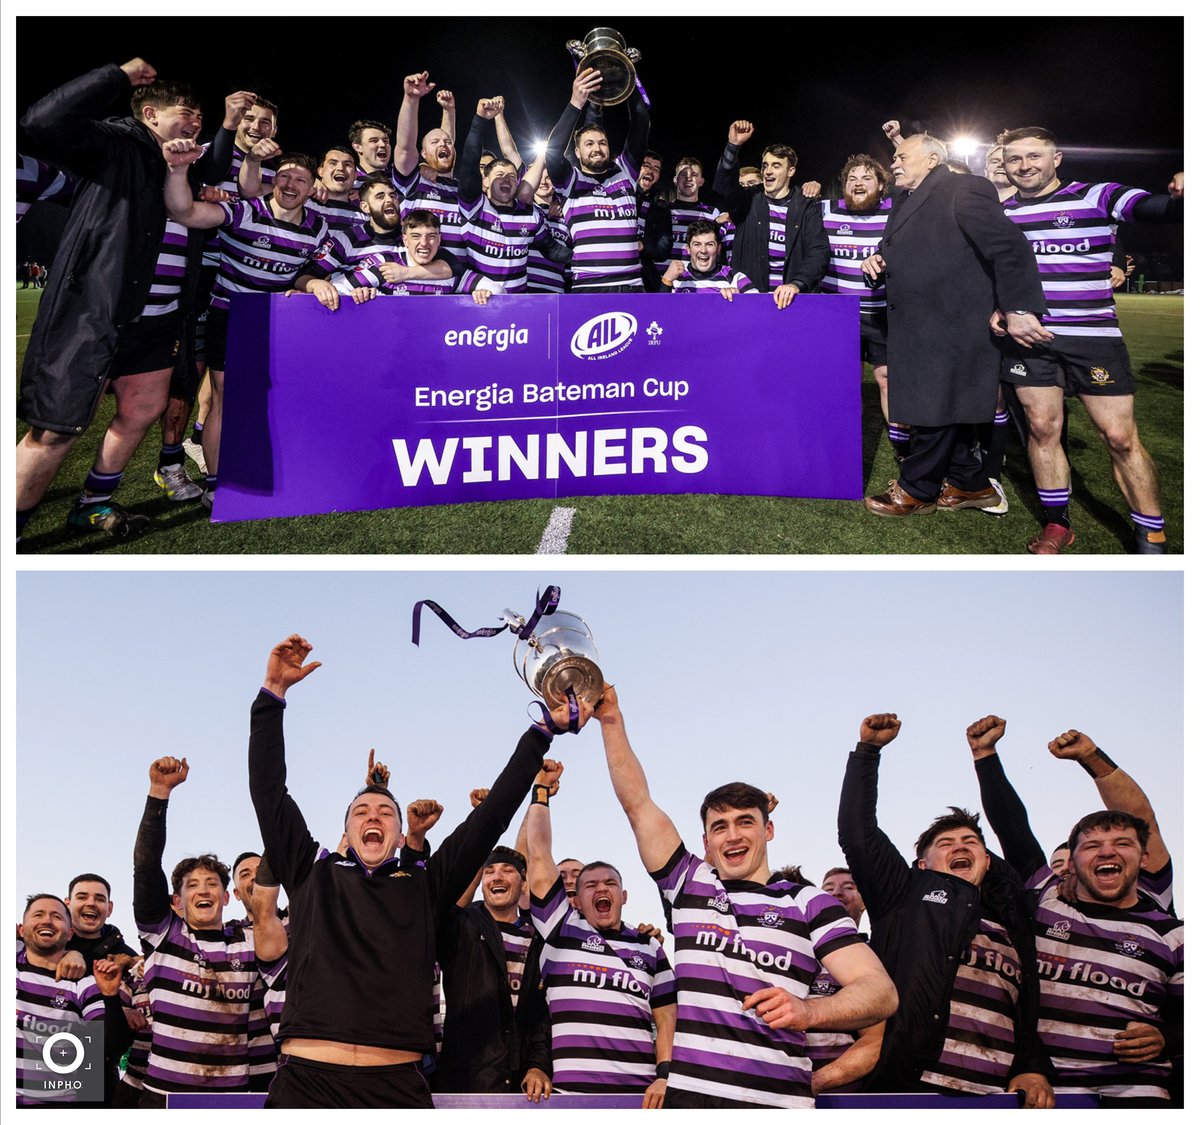 Back To Back 🏆➡️🏆 @terenurerugby celebrate defending their Bateman Cup crown with victory over Young Munster in Lakelands Park this afternoon! 📸 @bennnbrady